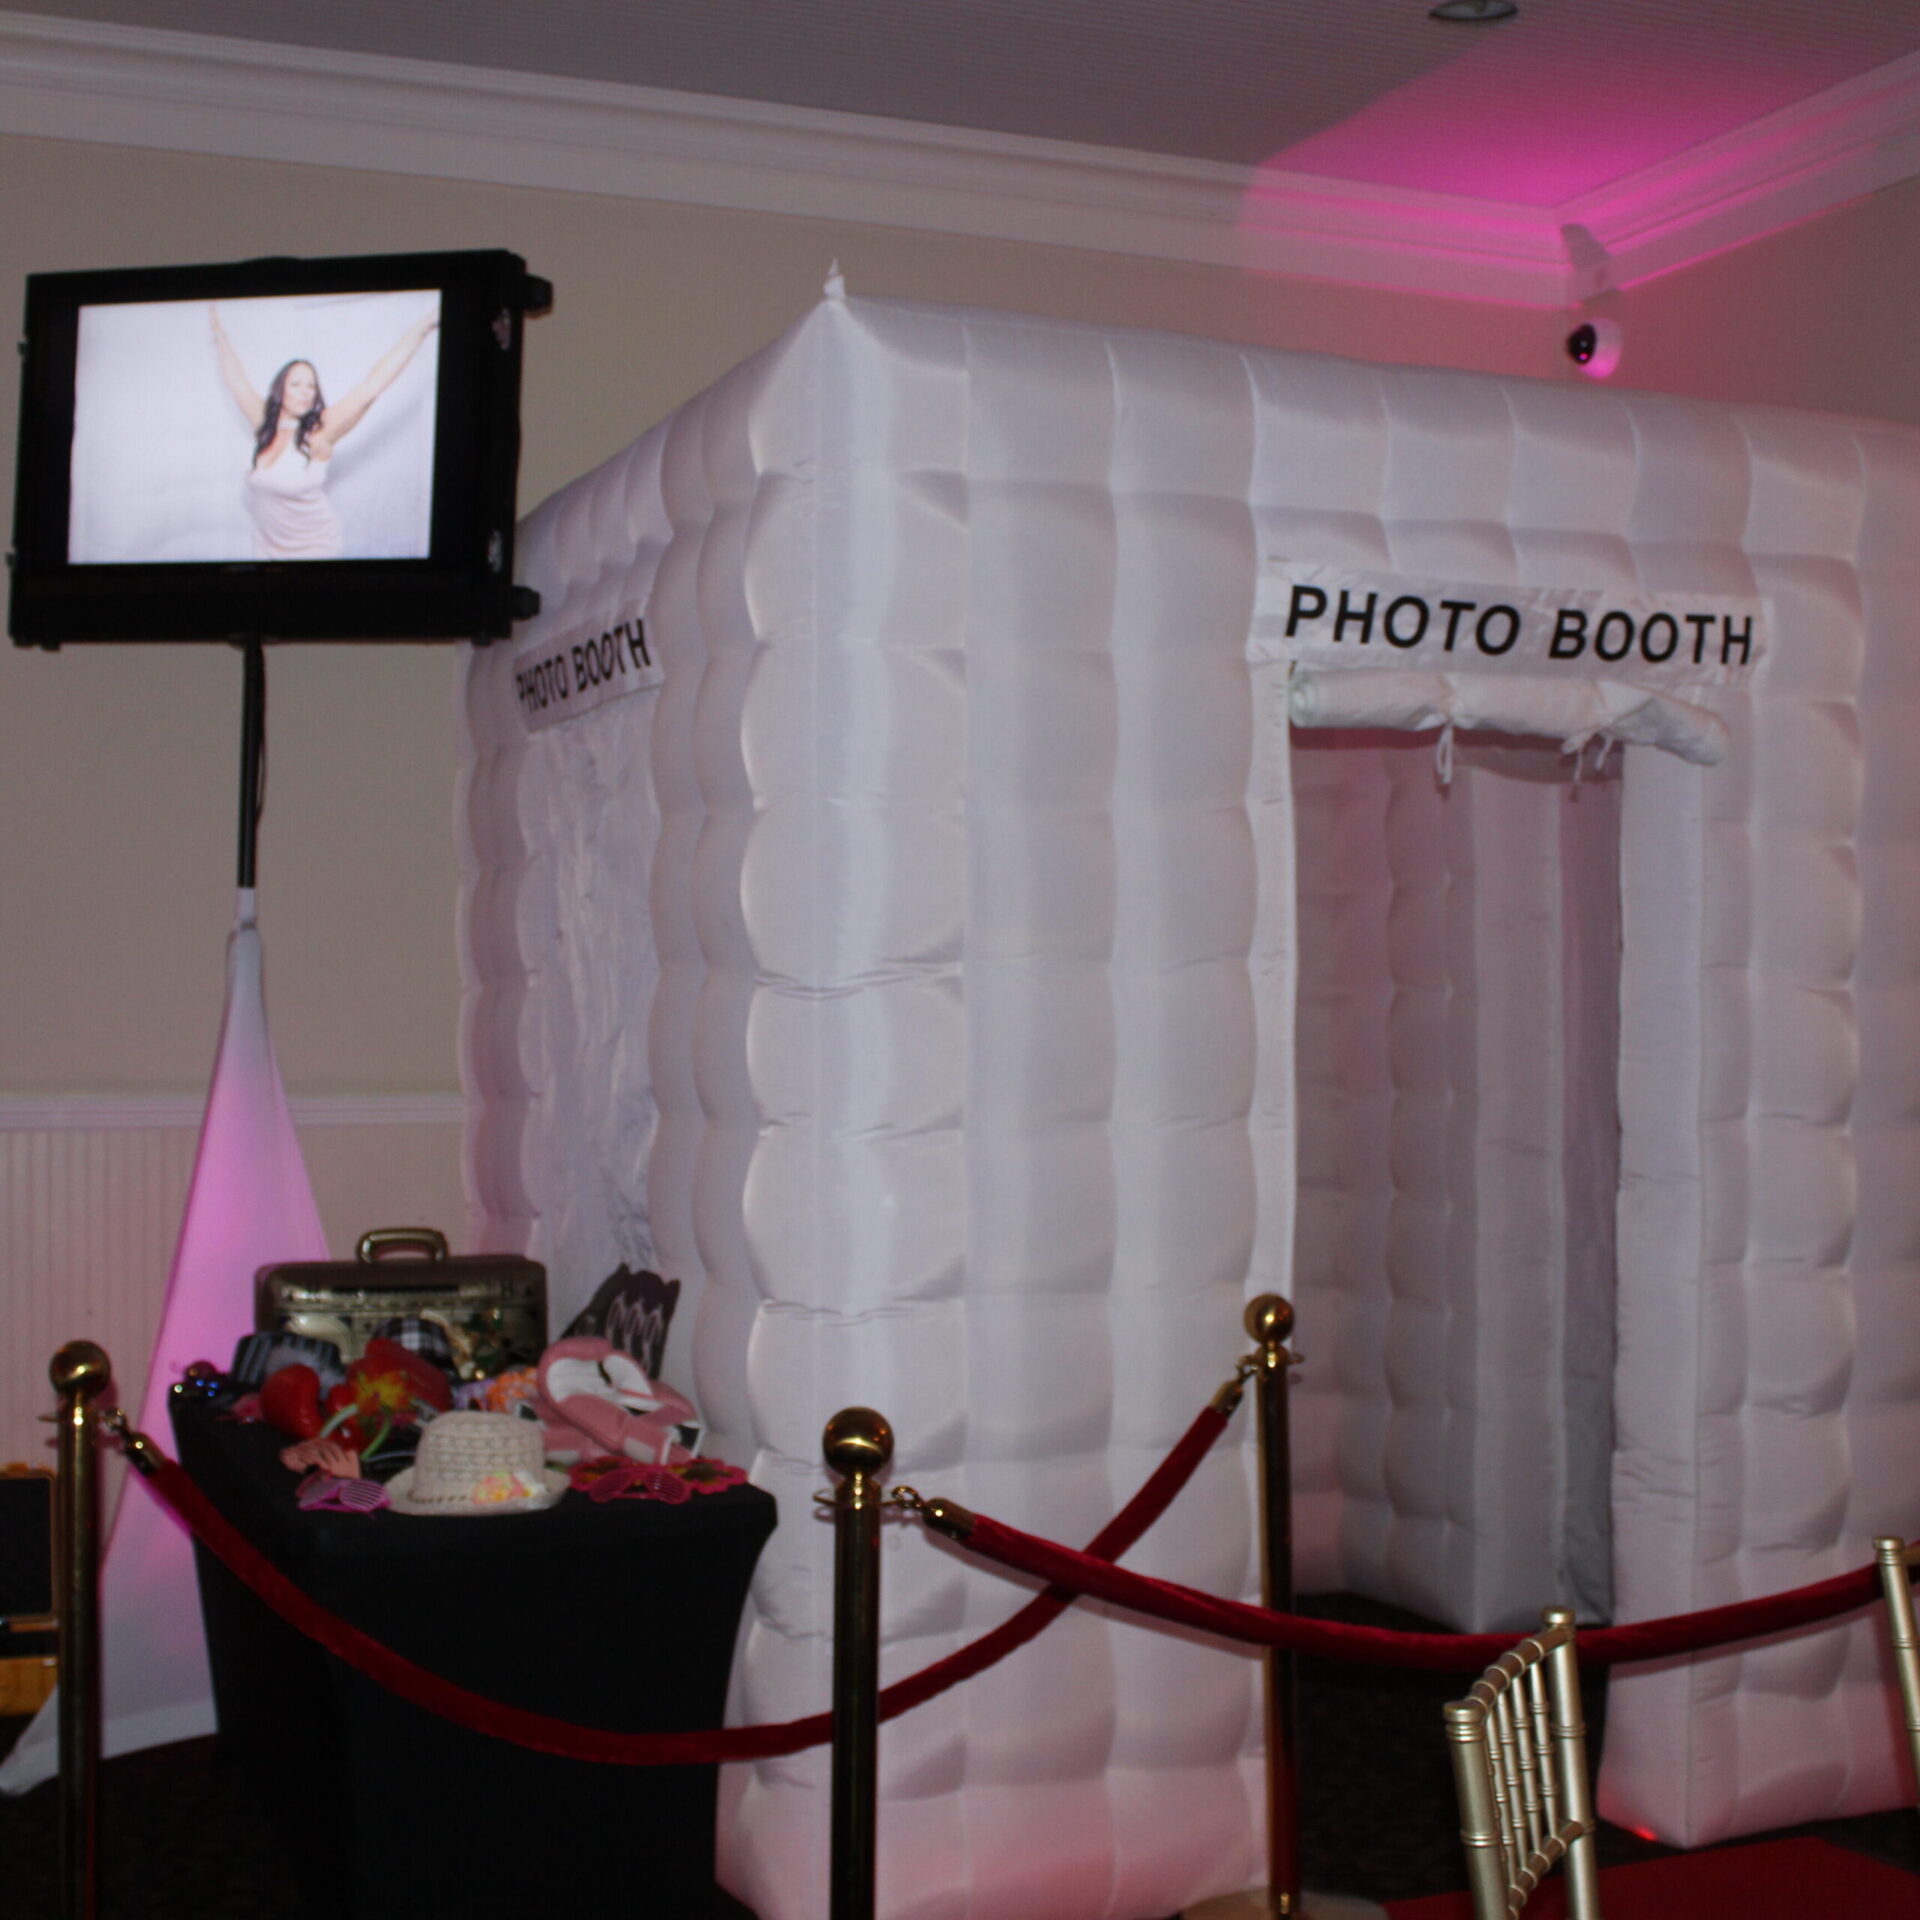 Photo Booth Rentals in White Plains, NY